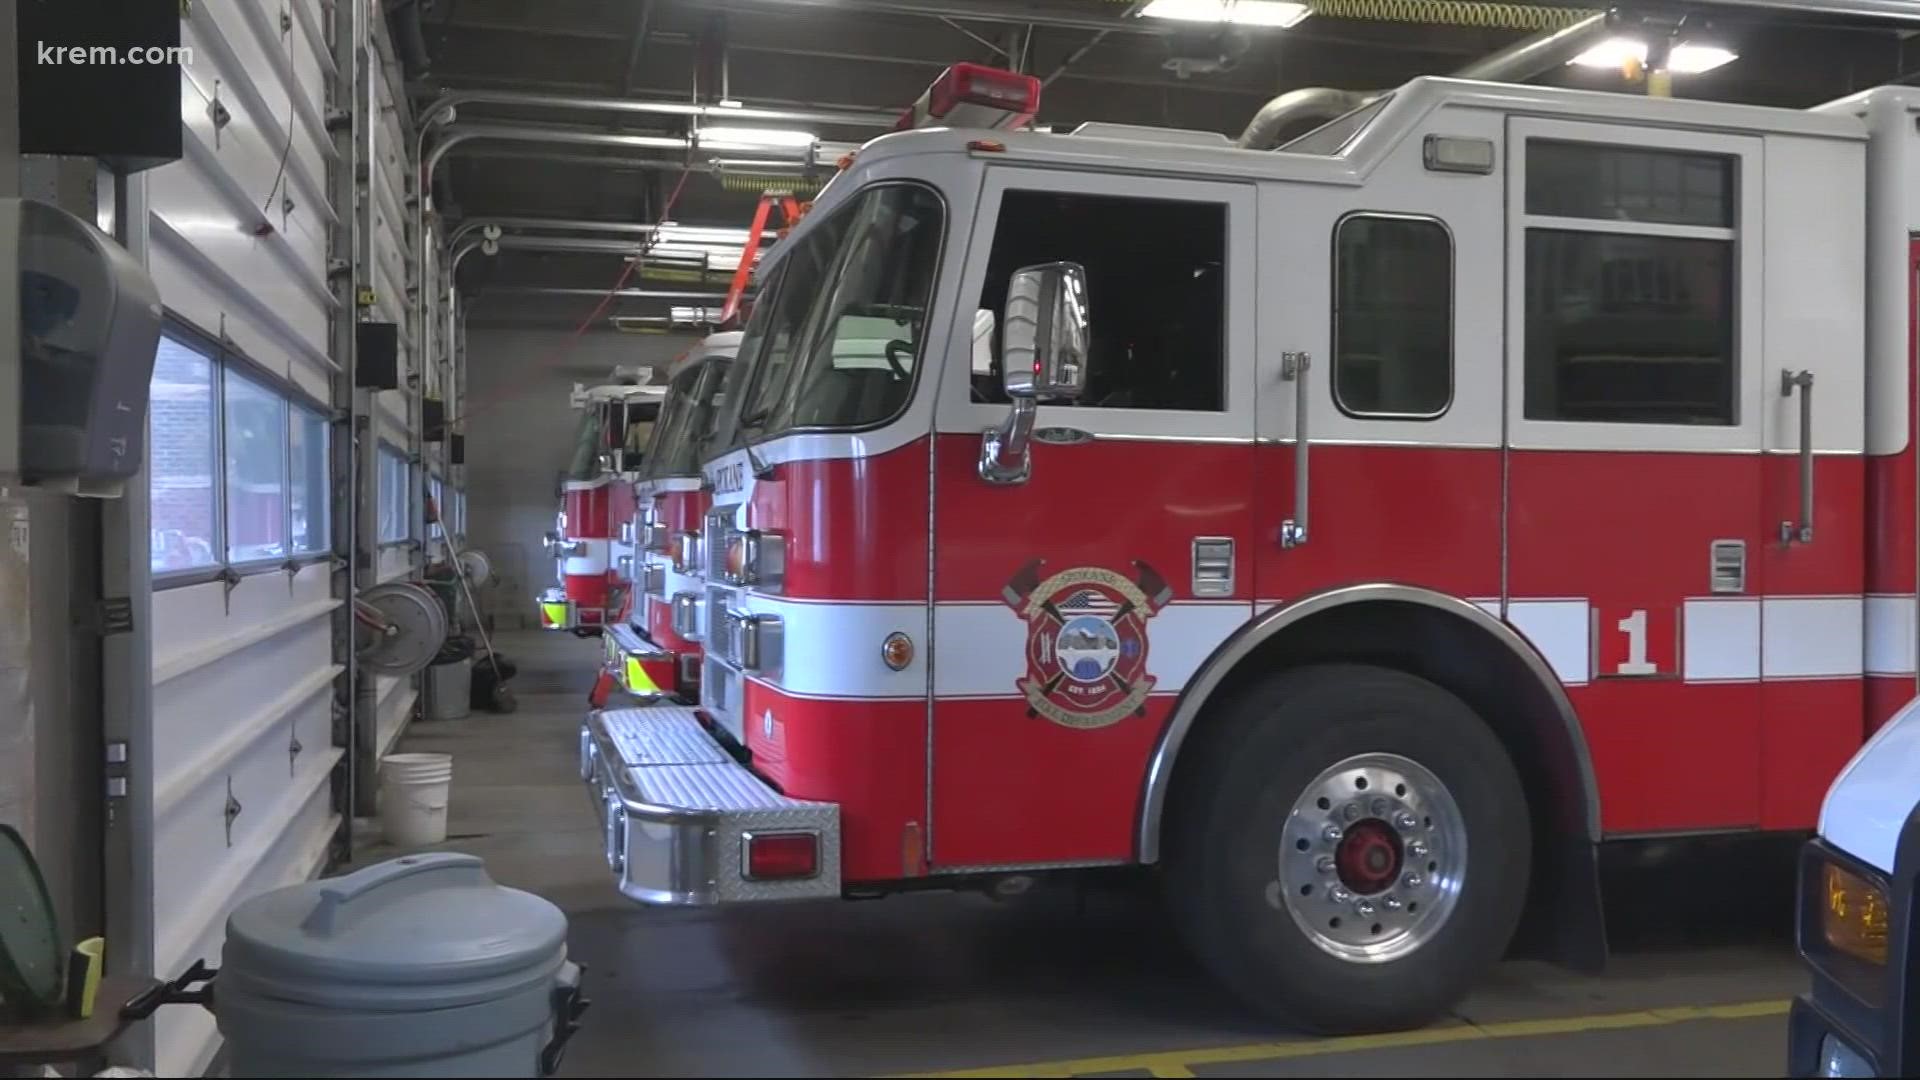 The city of Spokane reported it could lose 48 firefighters due to the state’s vaccination mandate. As of Tuesday, that number has dropped to 38.